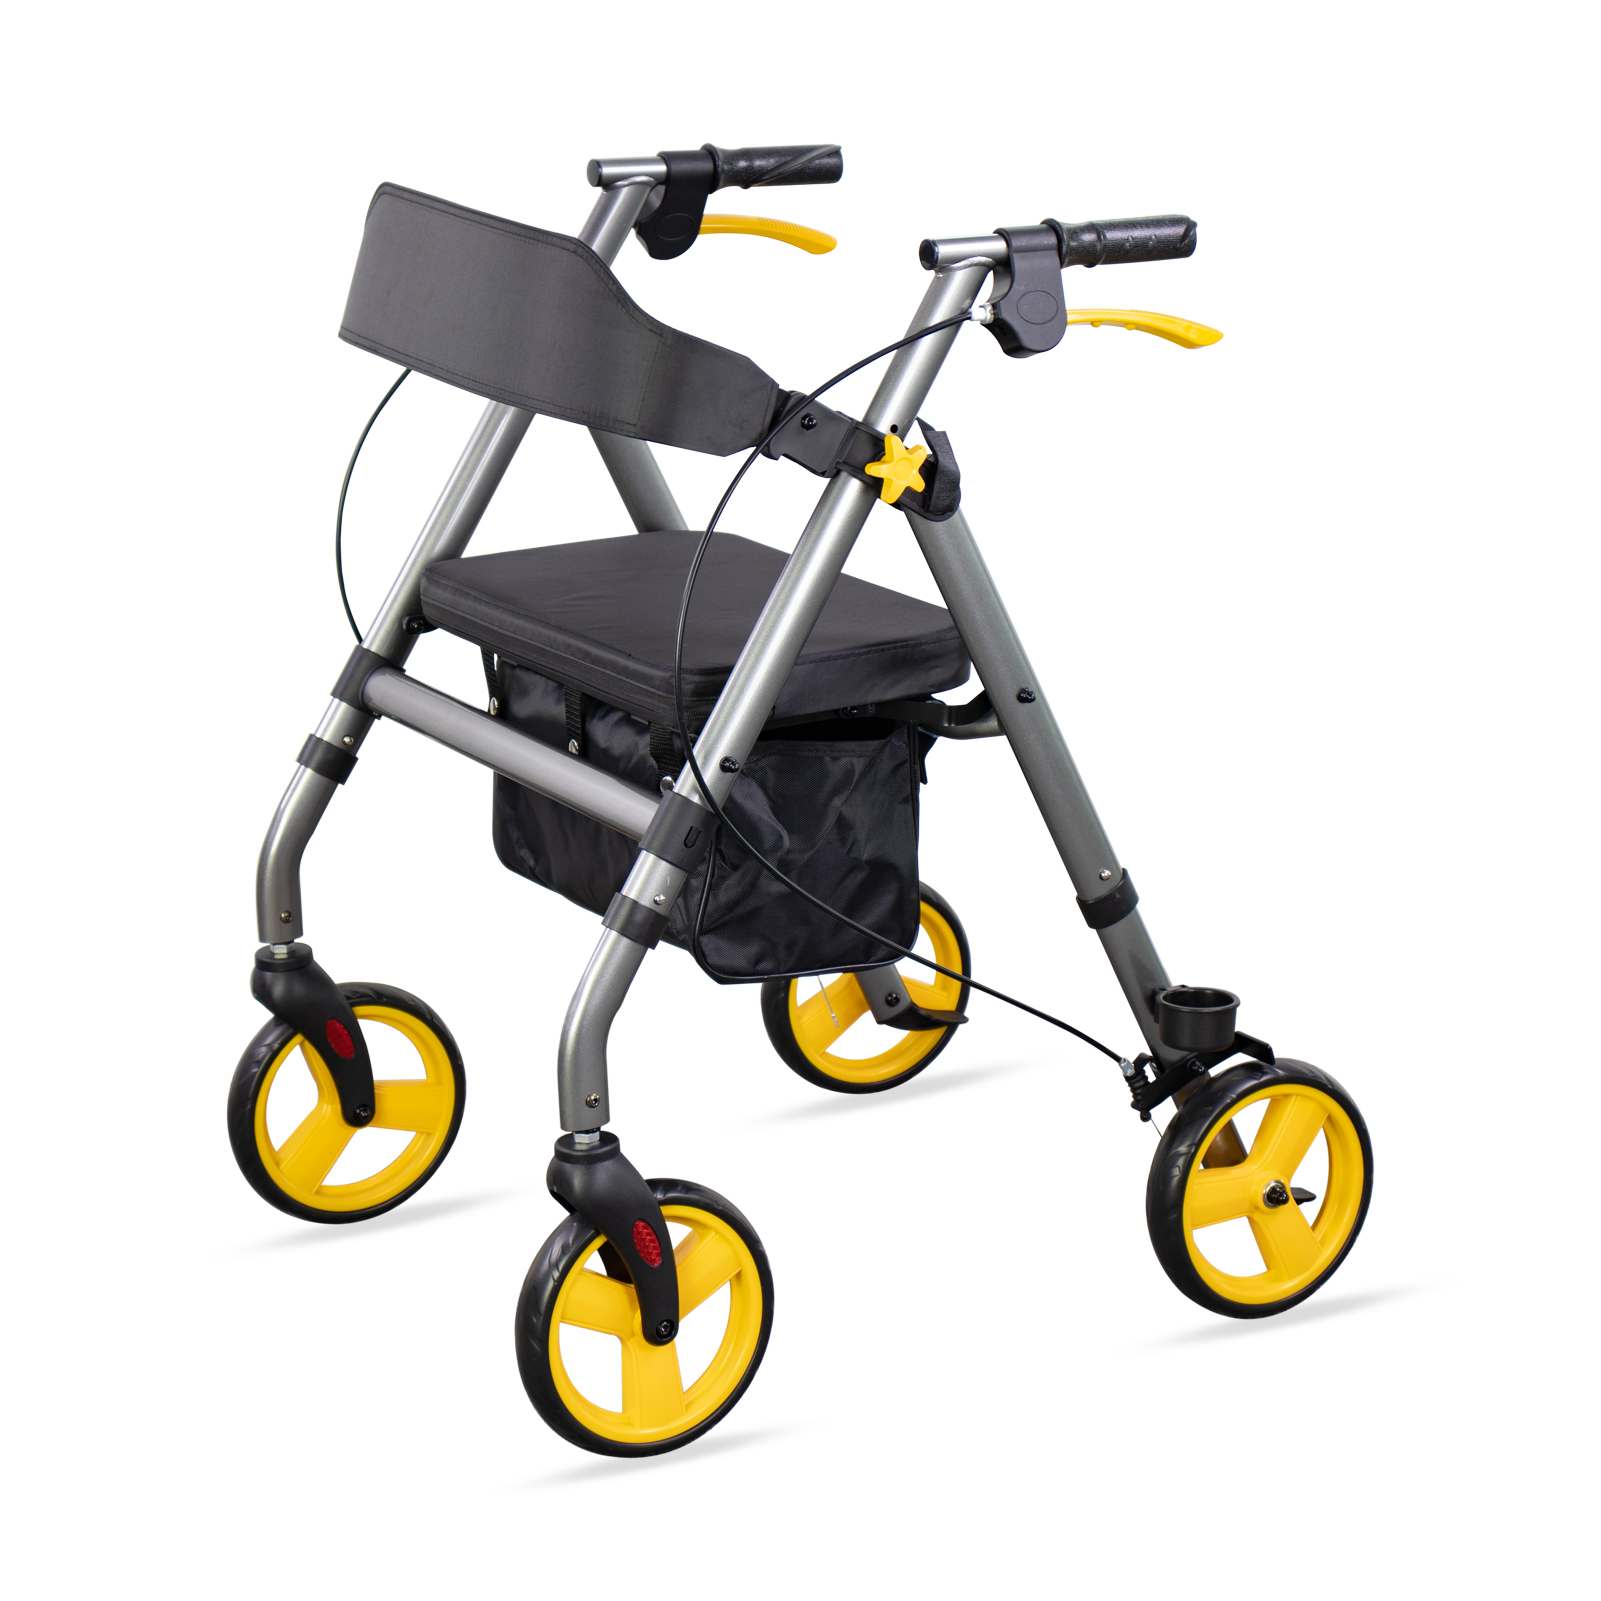 Comparison of the advantages and disadvantages of materials for wheeled walkers for the elderly and disabled